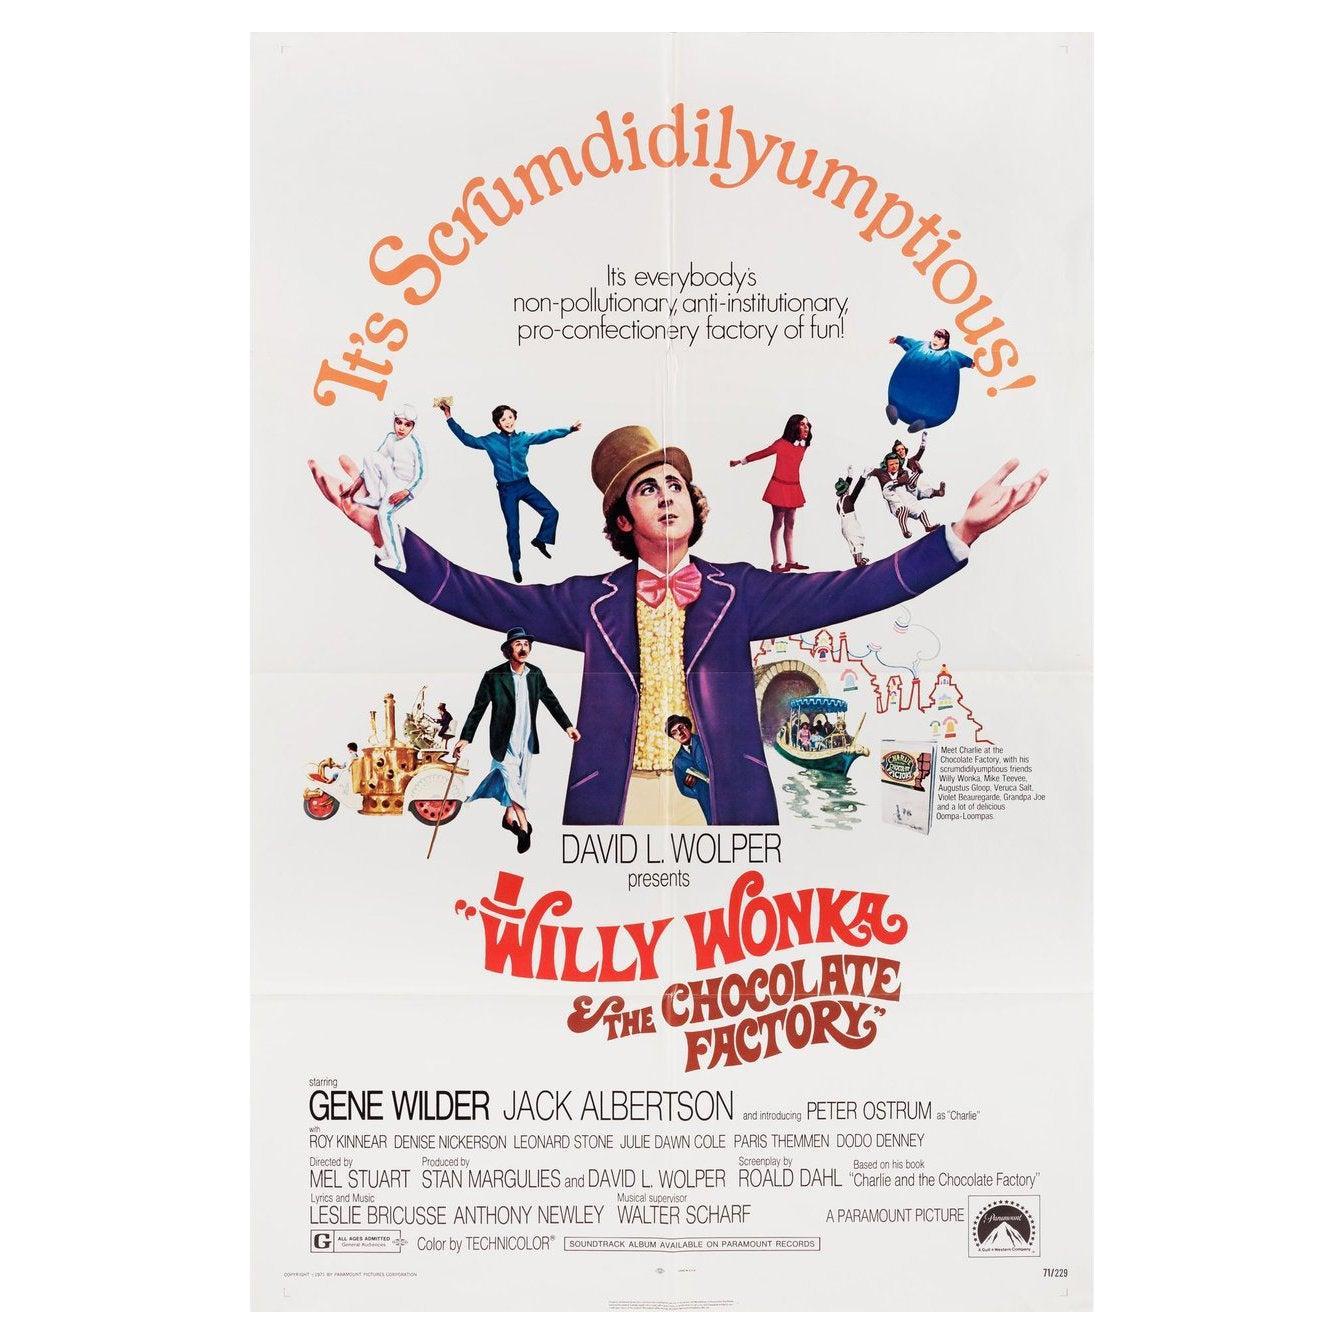 Willy Wonka & the Chocolate Factory 1971 U.S. One Sheet Film Poster